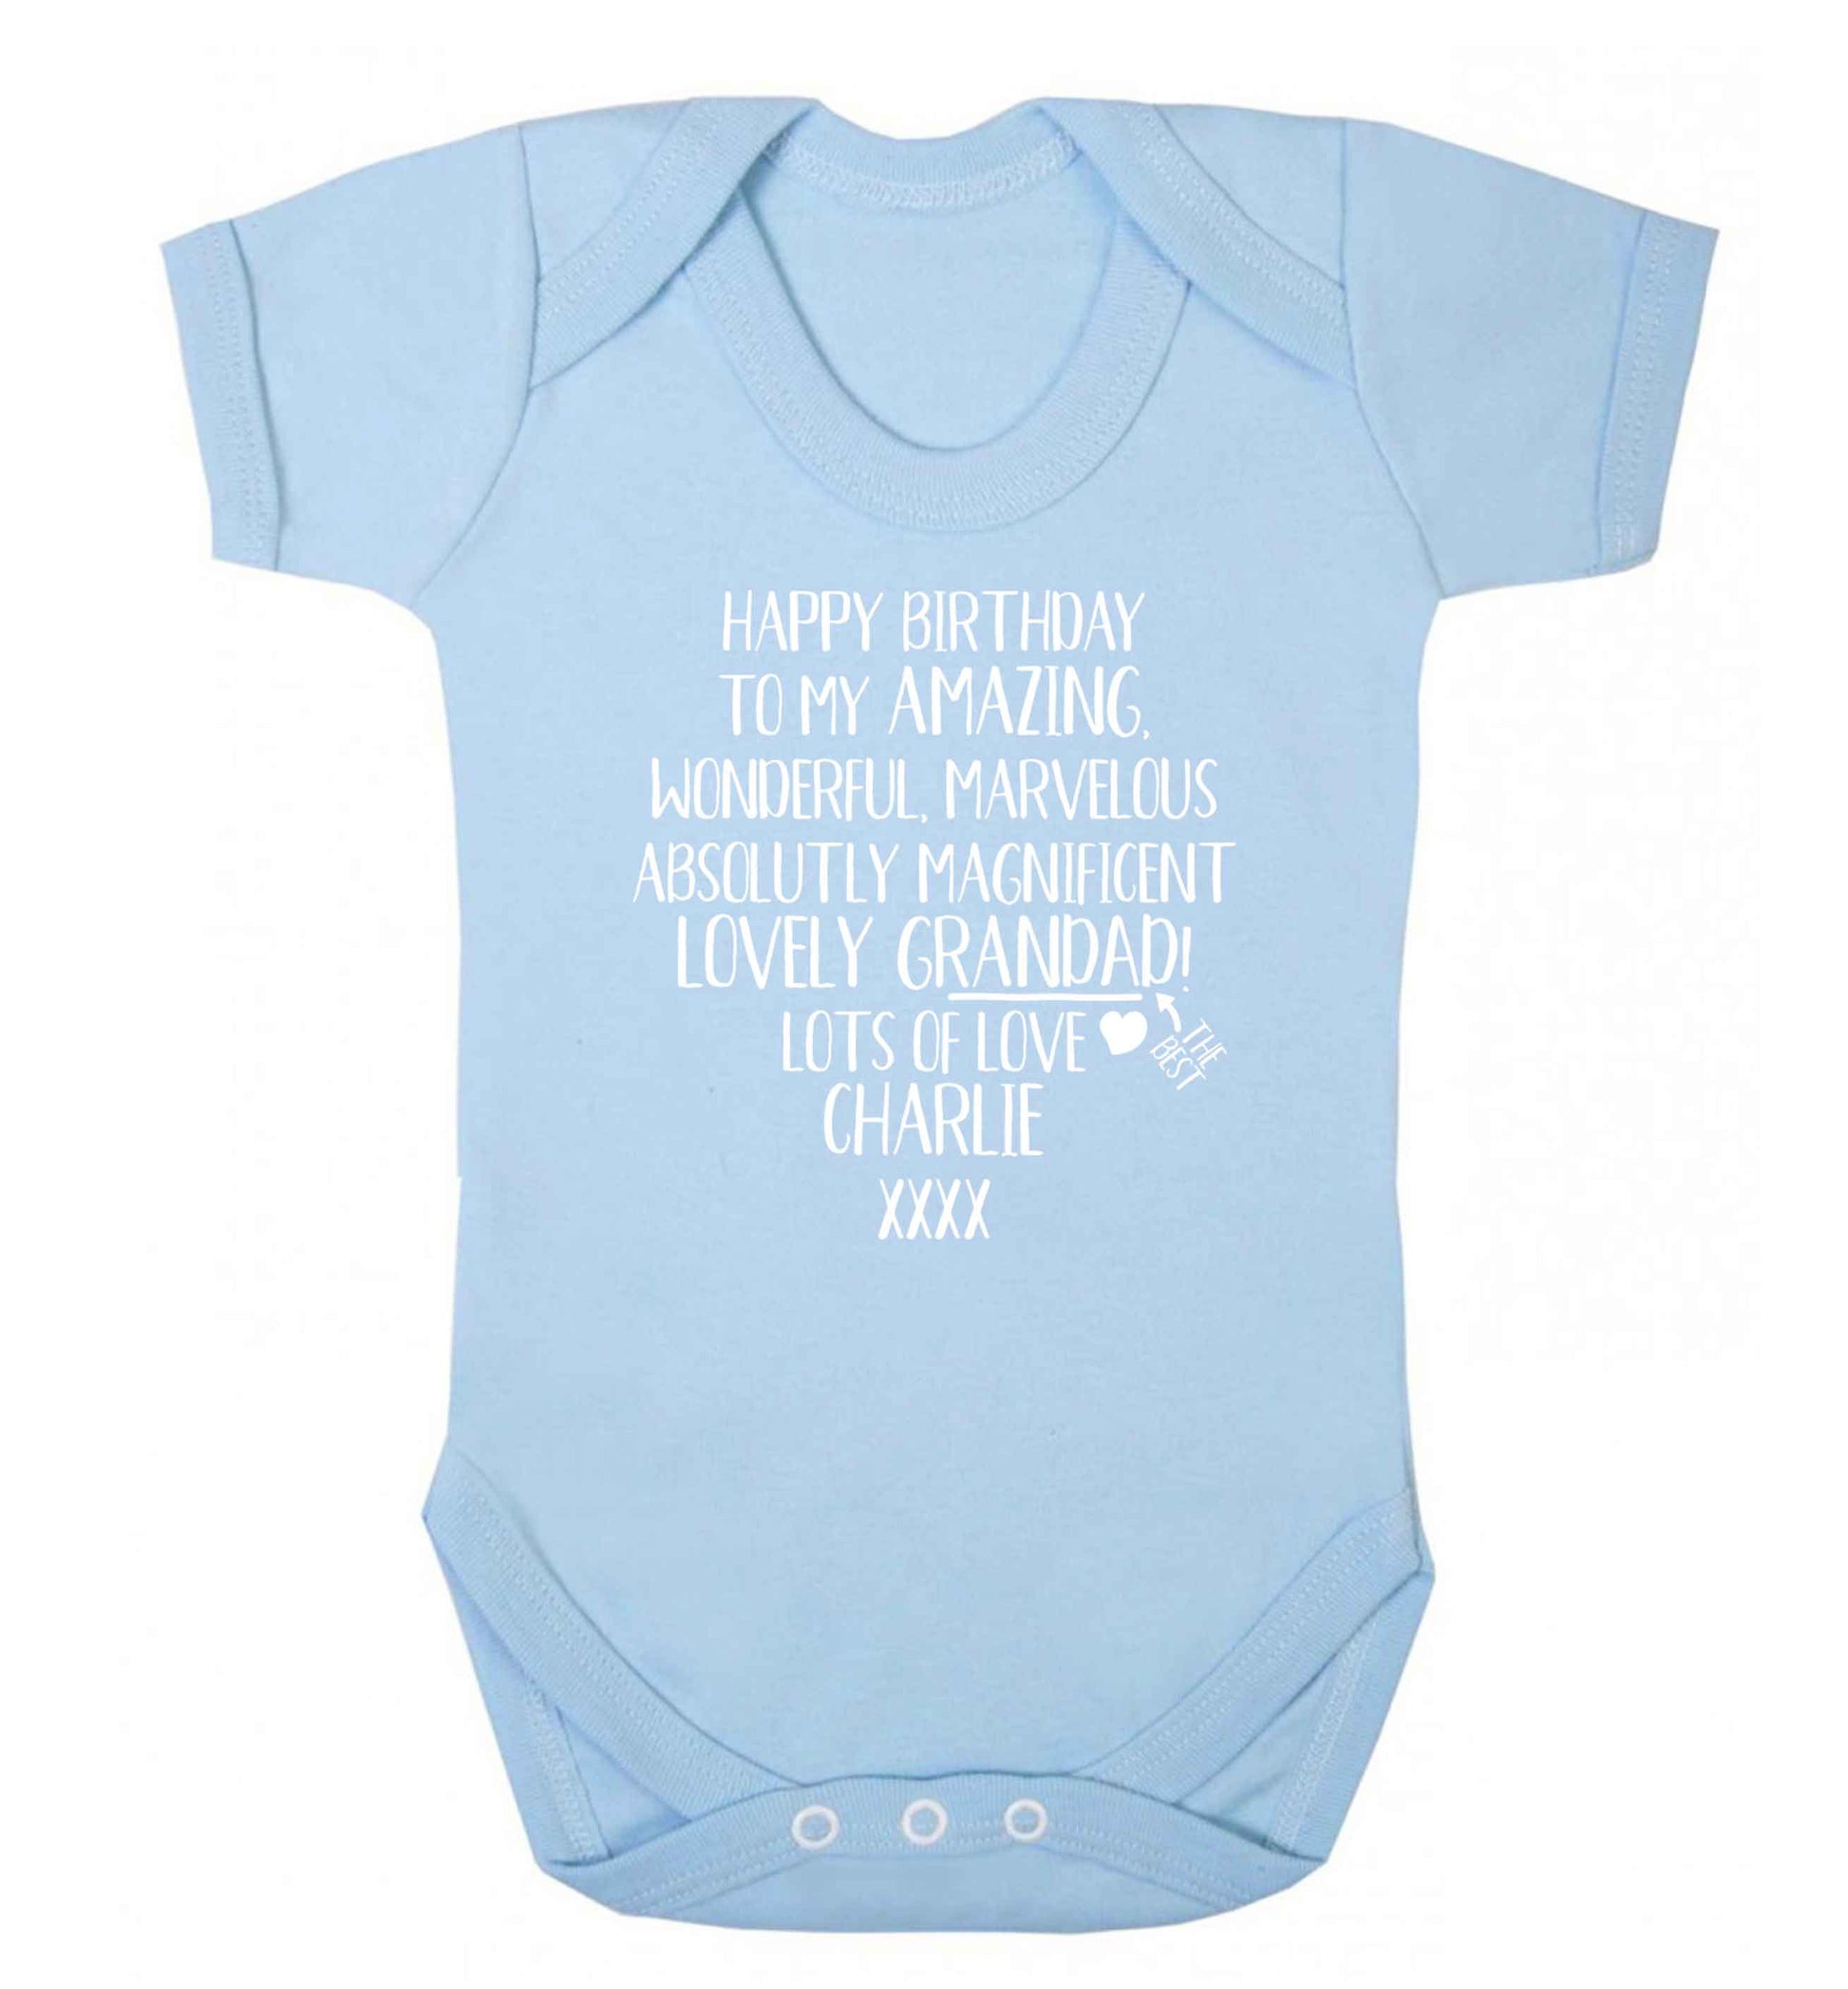 Personalised happy birthday to my amazing, wonderful, lovely grandad Baby Vest pale blue 18-24 months